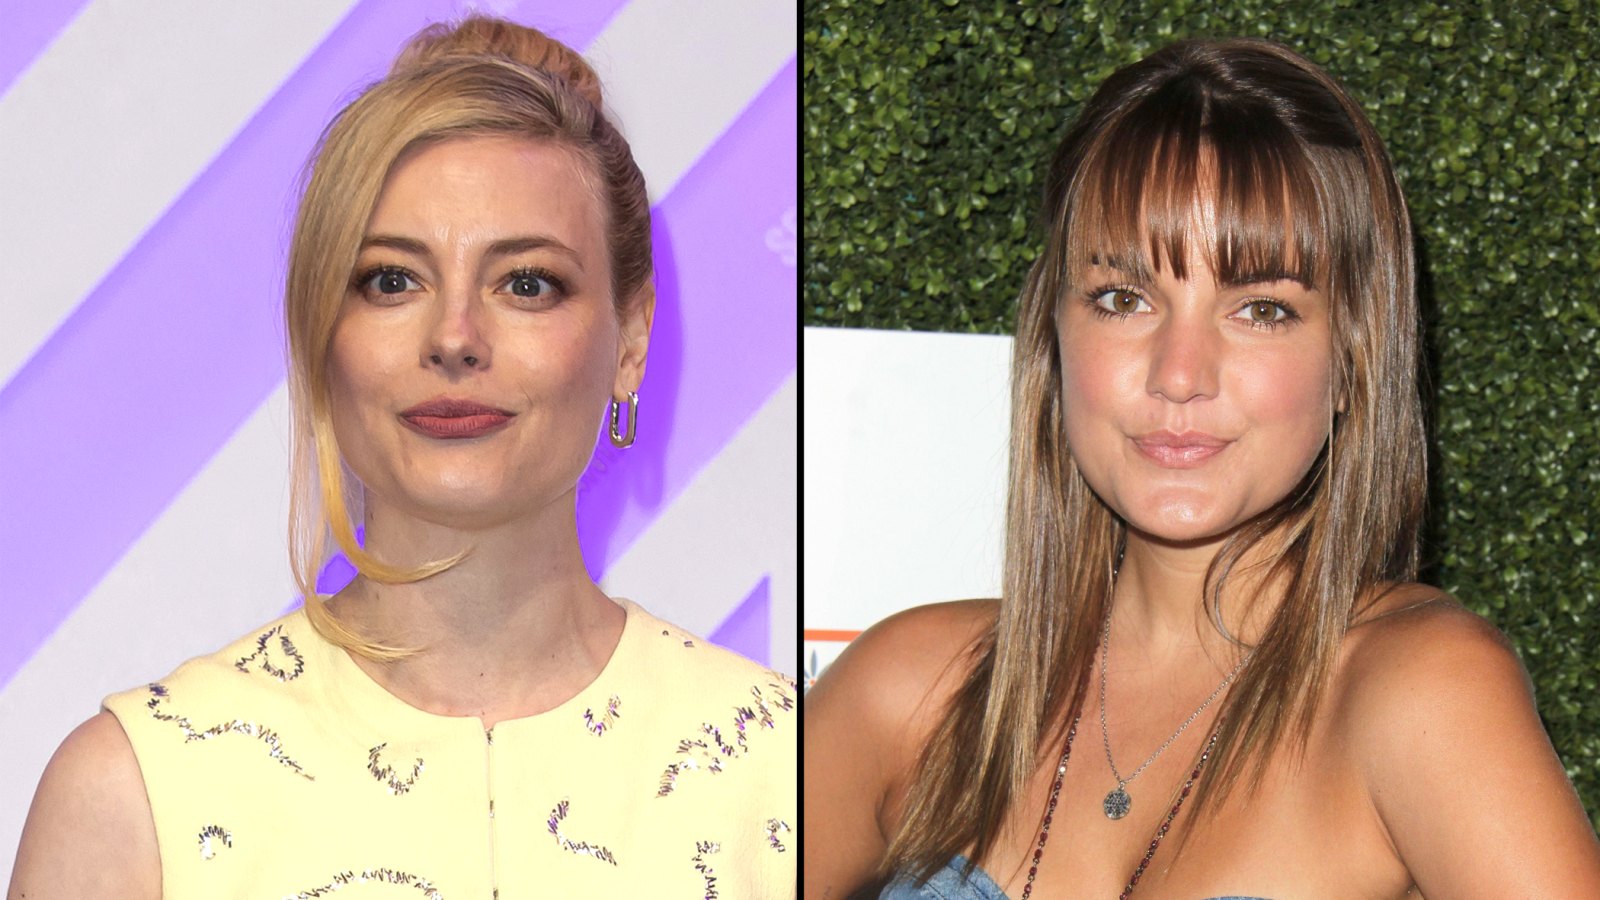 Gillian Jacobs Reveals Surprising Connection to ‘Vanderpump Rules’ Alum Laura-Leigh: 'That’s Actually Why I Started Watching the Show'